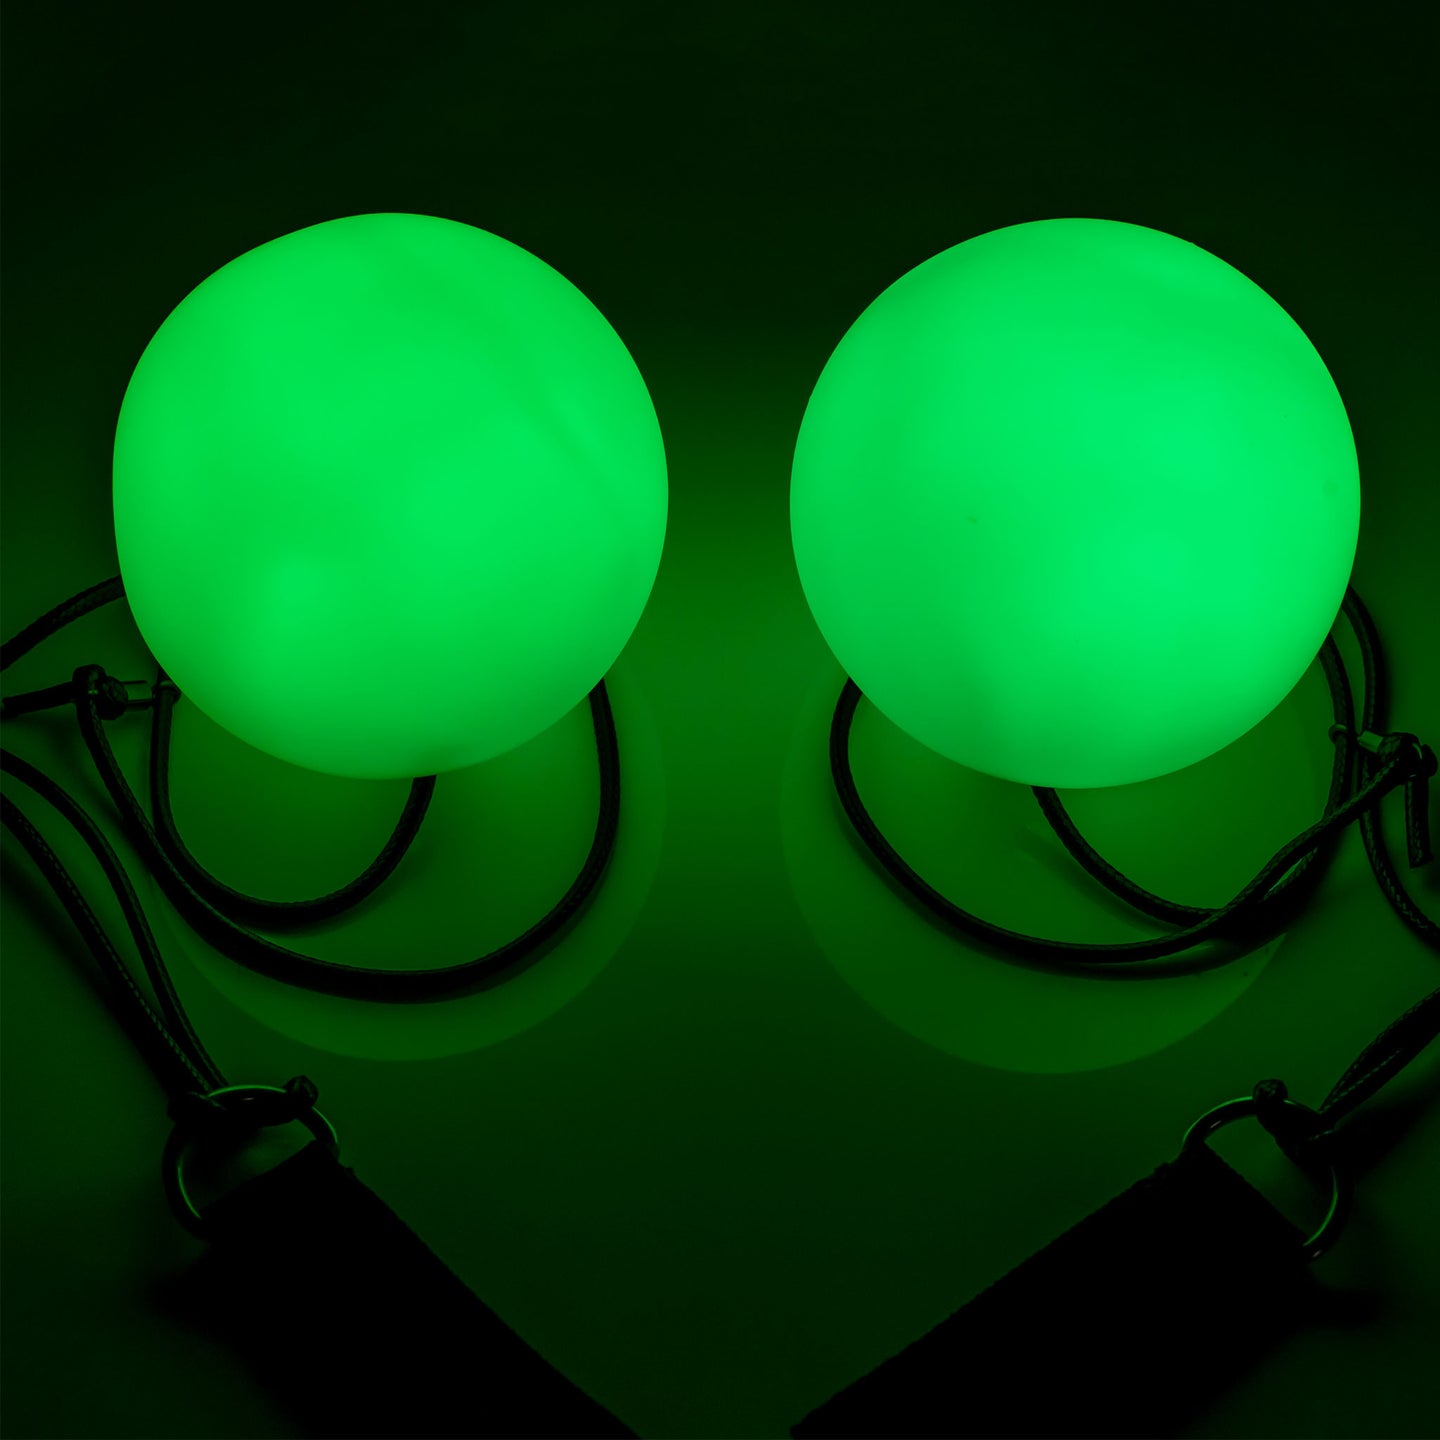 LED Poly Poi glow in green light